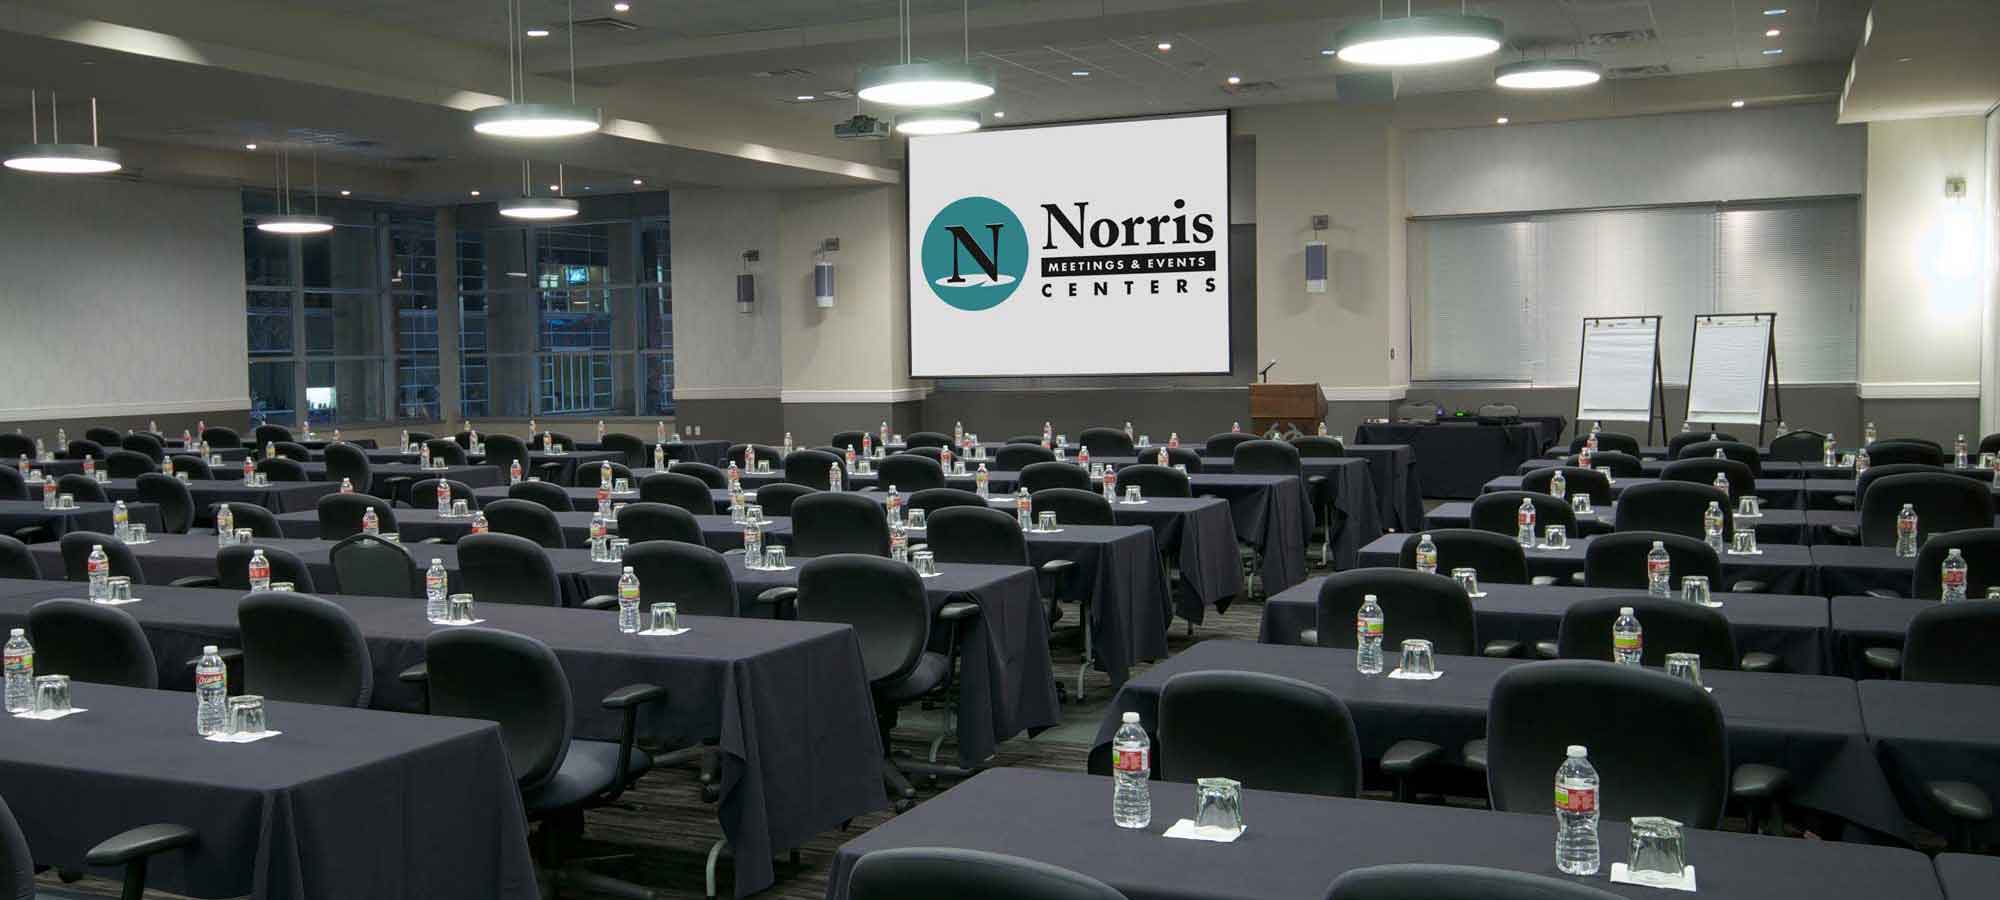 Norris Conference Centers Norris Centers